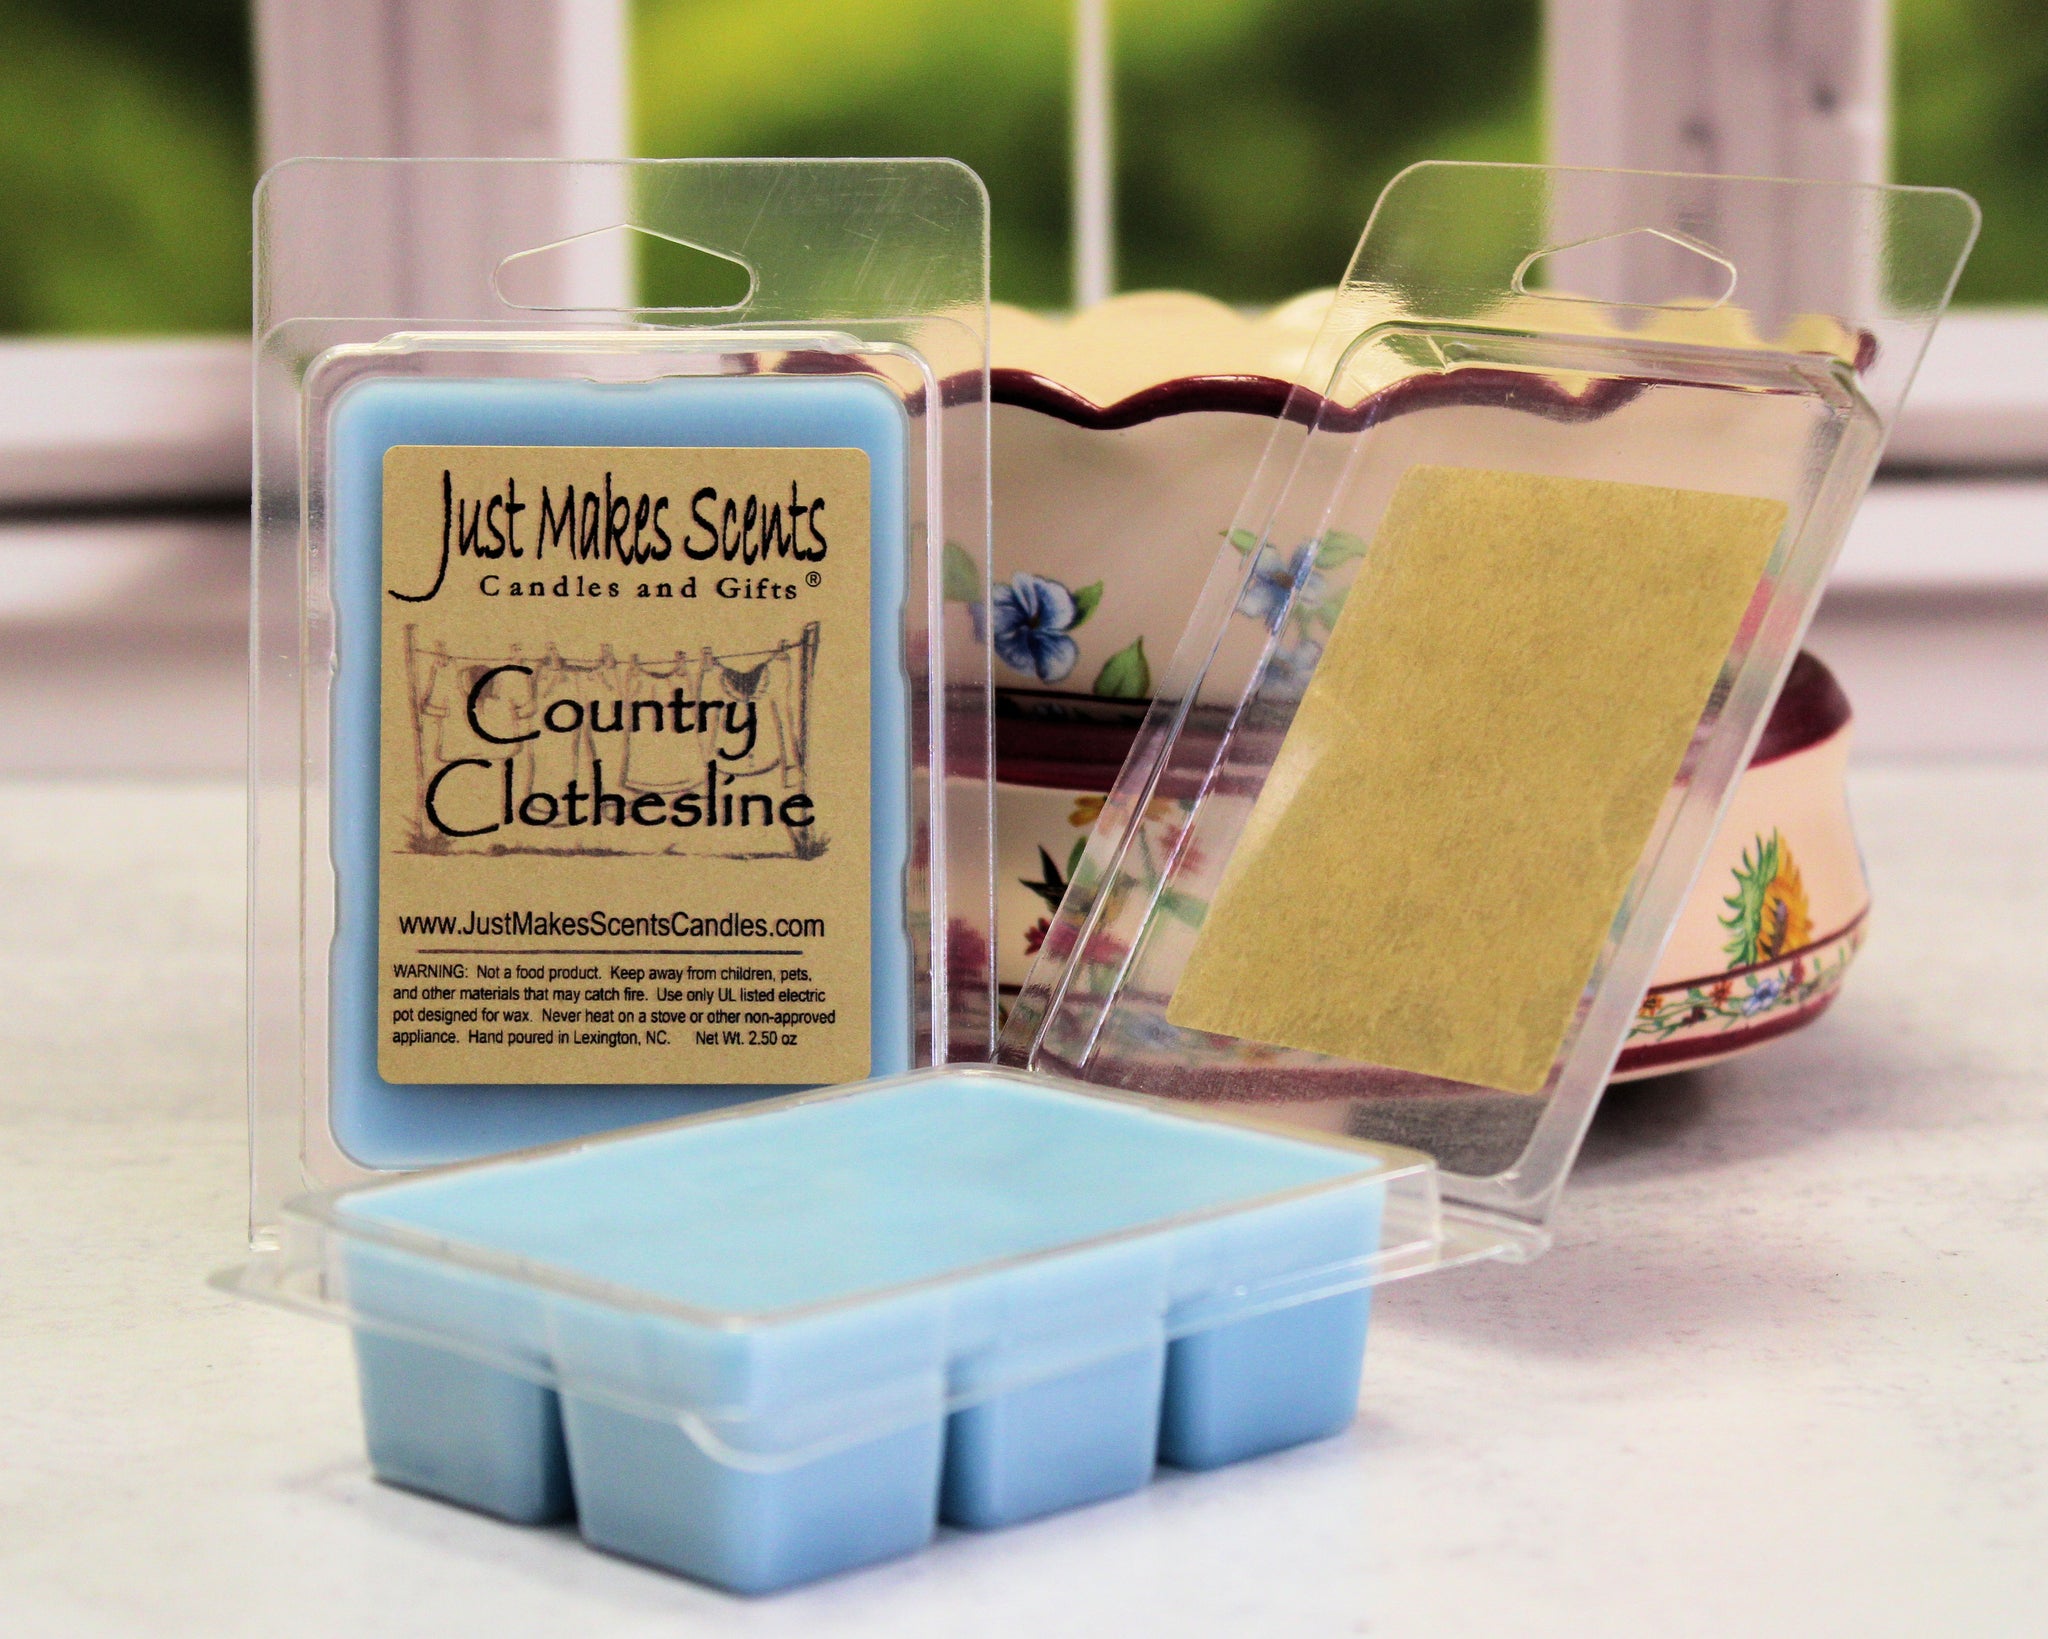 Laundry Day Scented Wax Melts Long Lasting Wax Melts for 